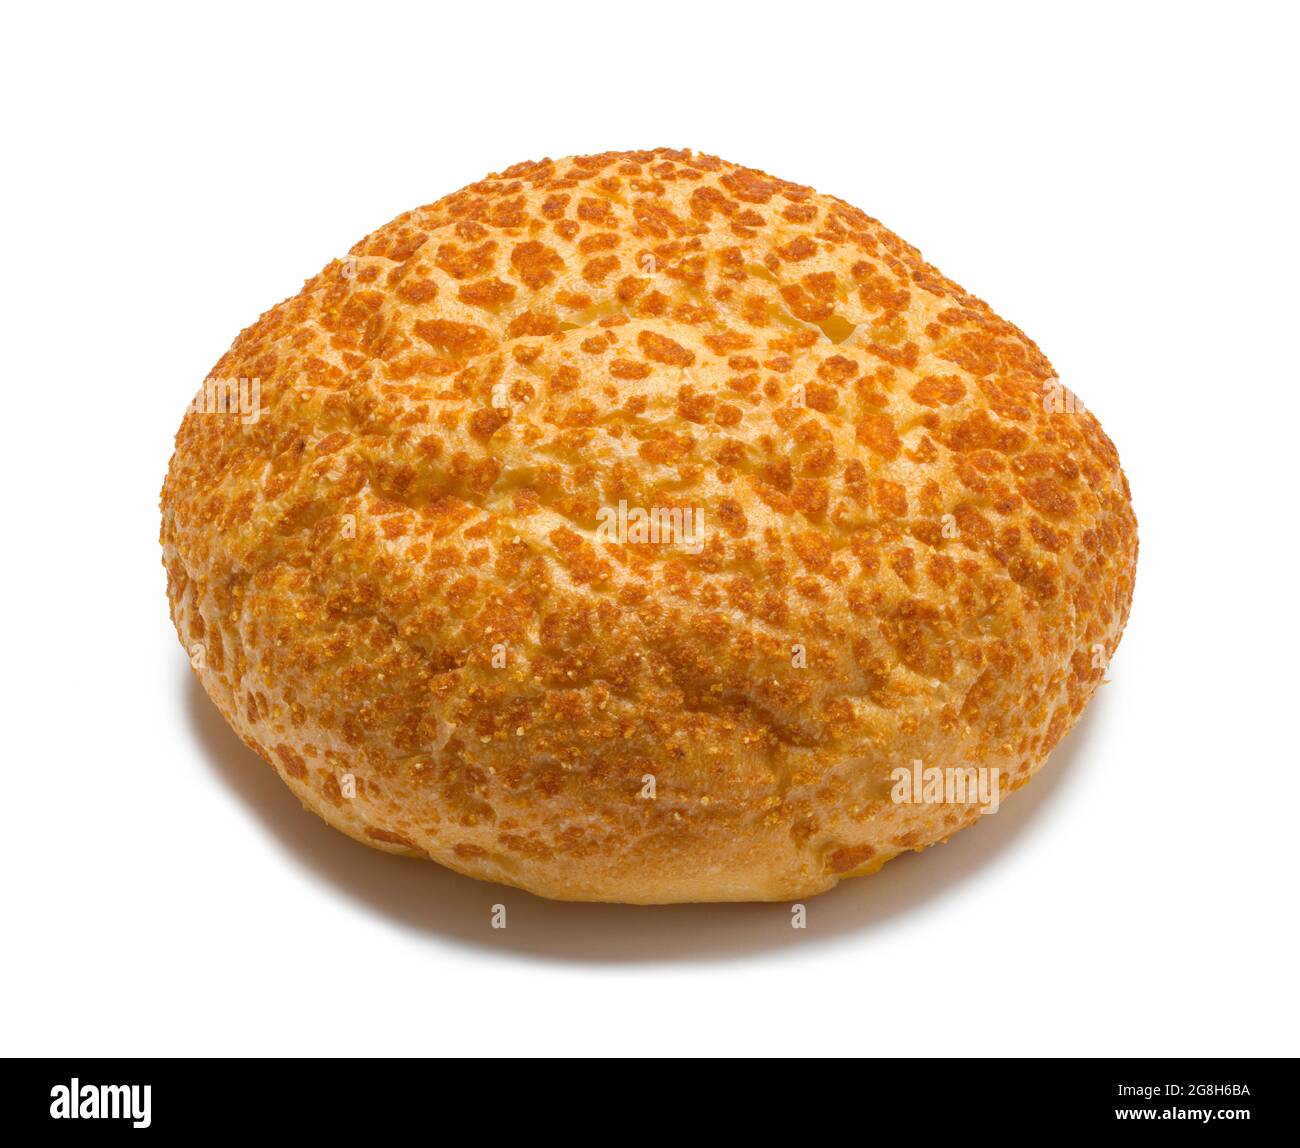 Wheat Bread Roll Cut Out on White. Stock Photo